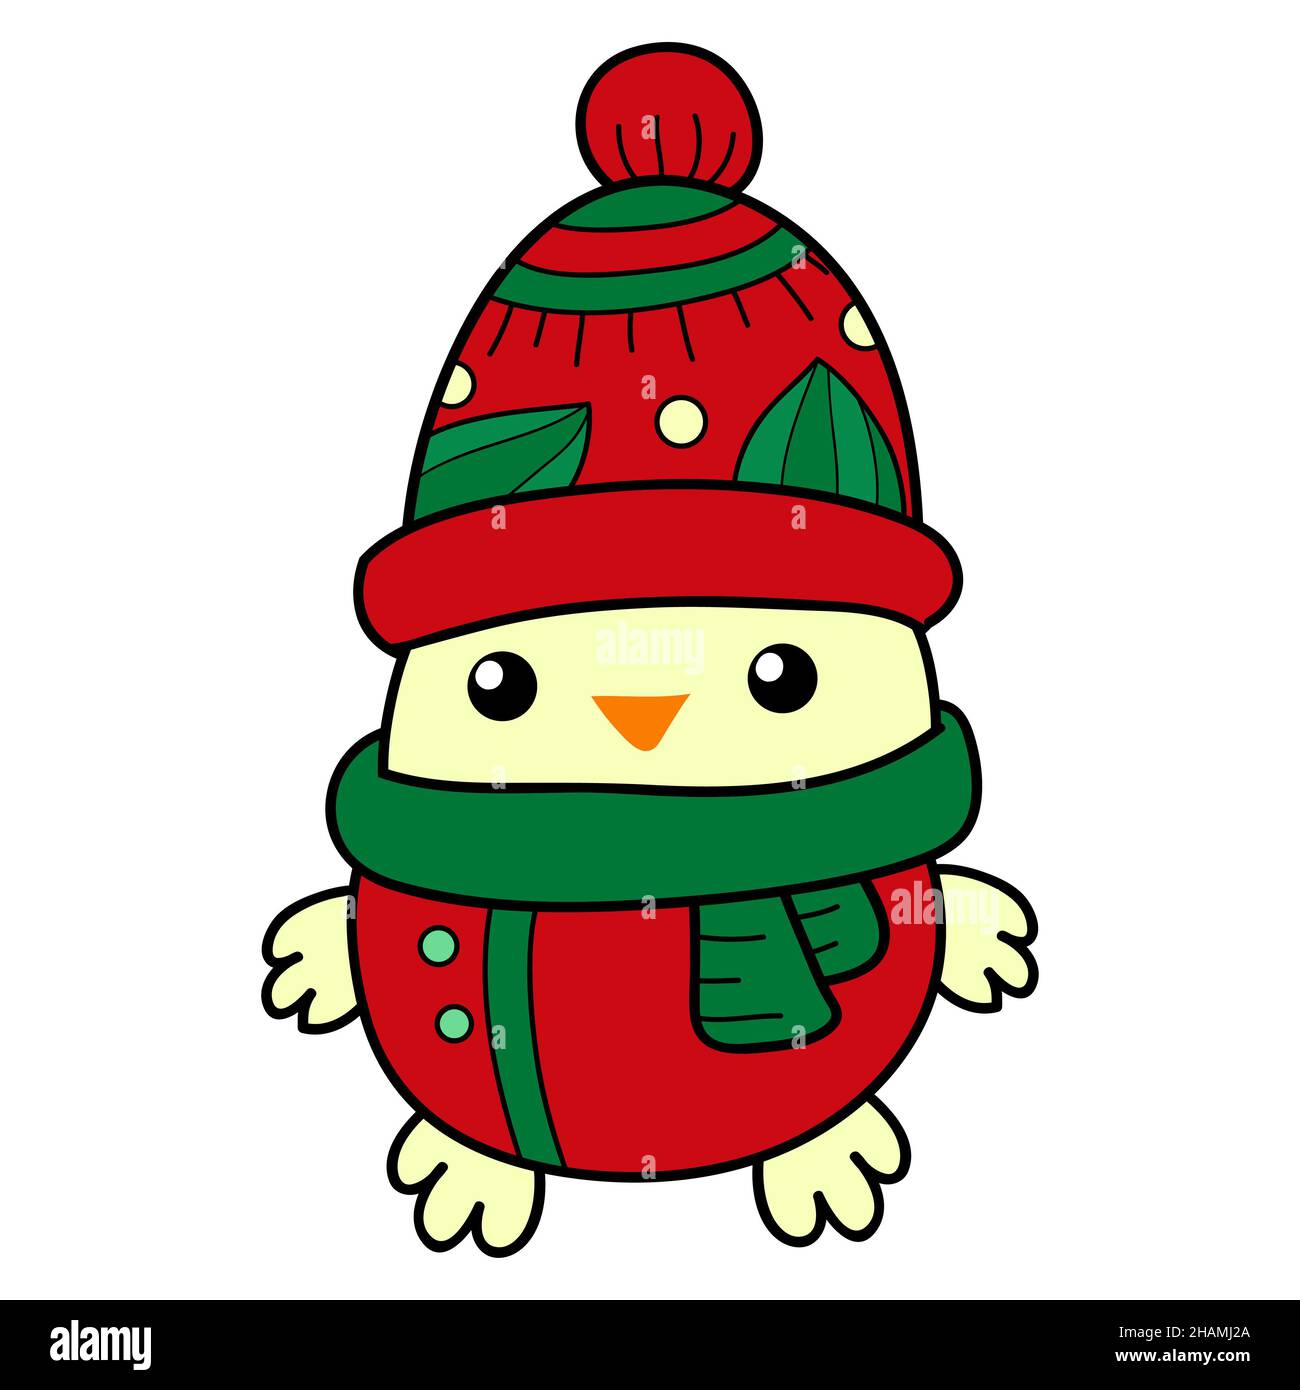 A Christmas penguin wearing a cap and scarf  illustration for print.Poster design. Stock Photo